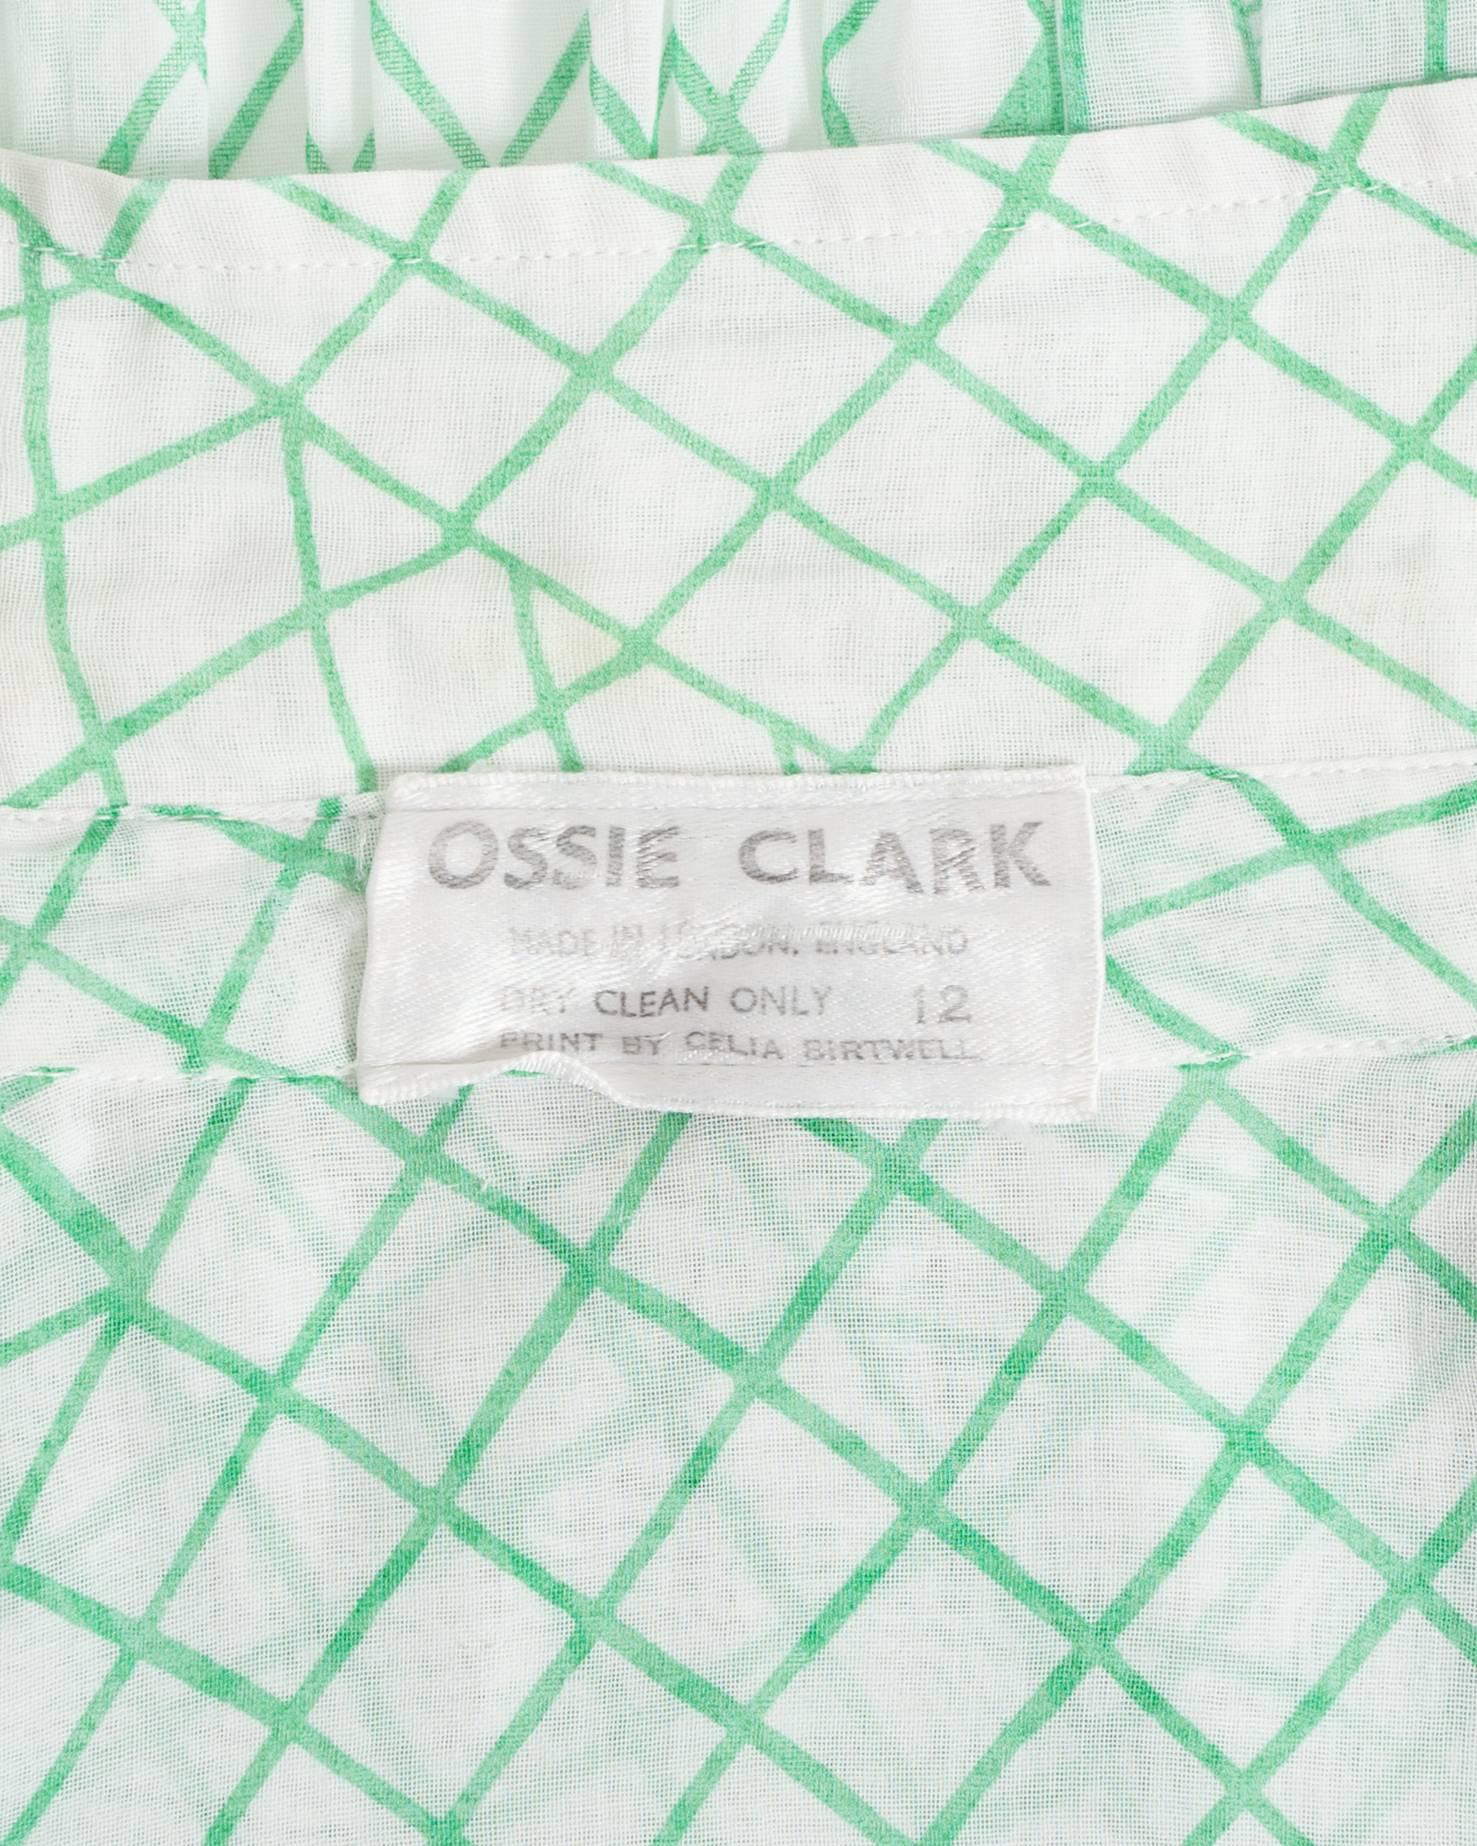 Ossie Clark voile blouse with Celia Birtwell print, circa 1972 2